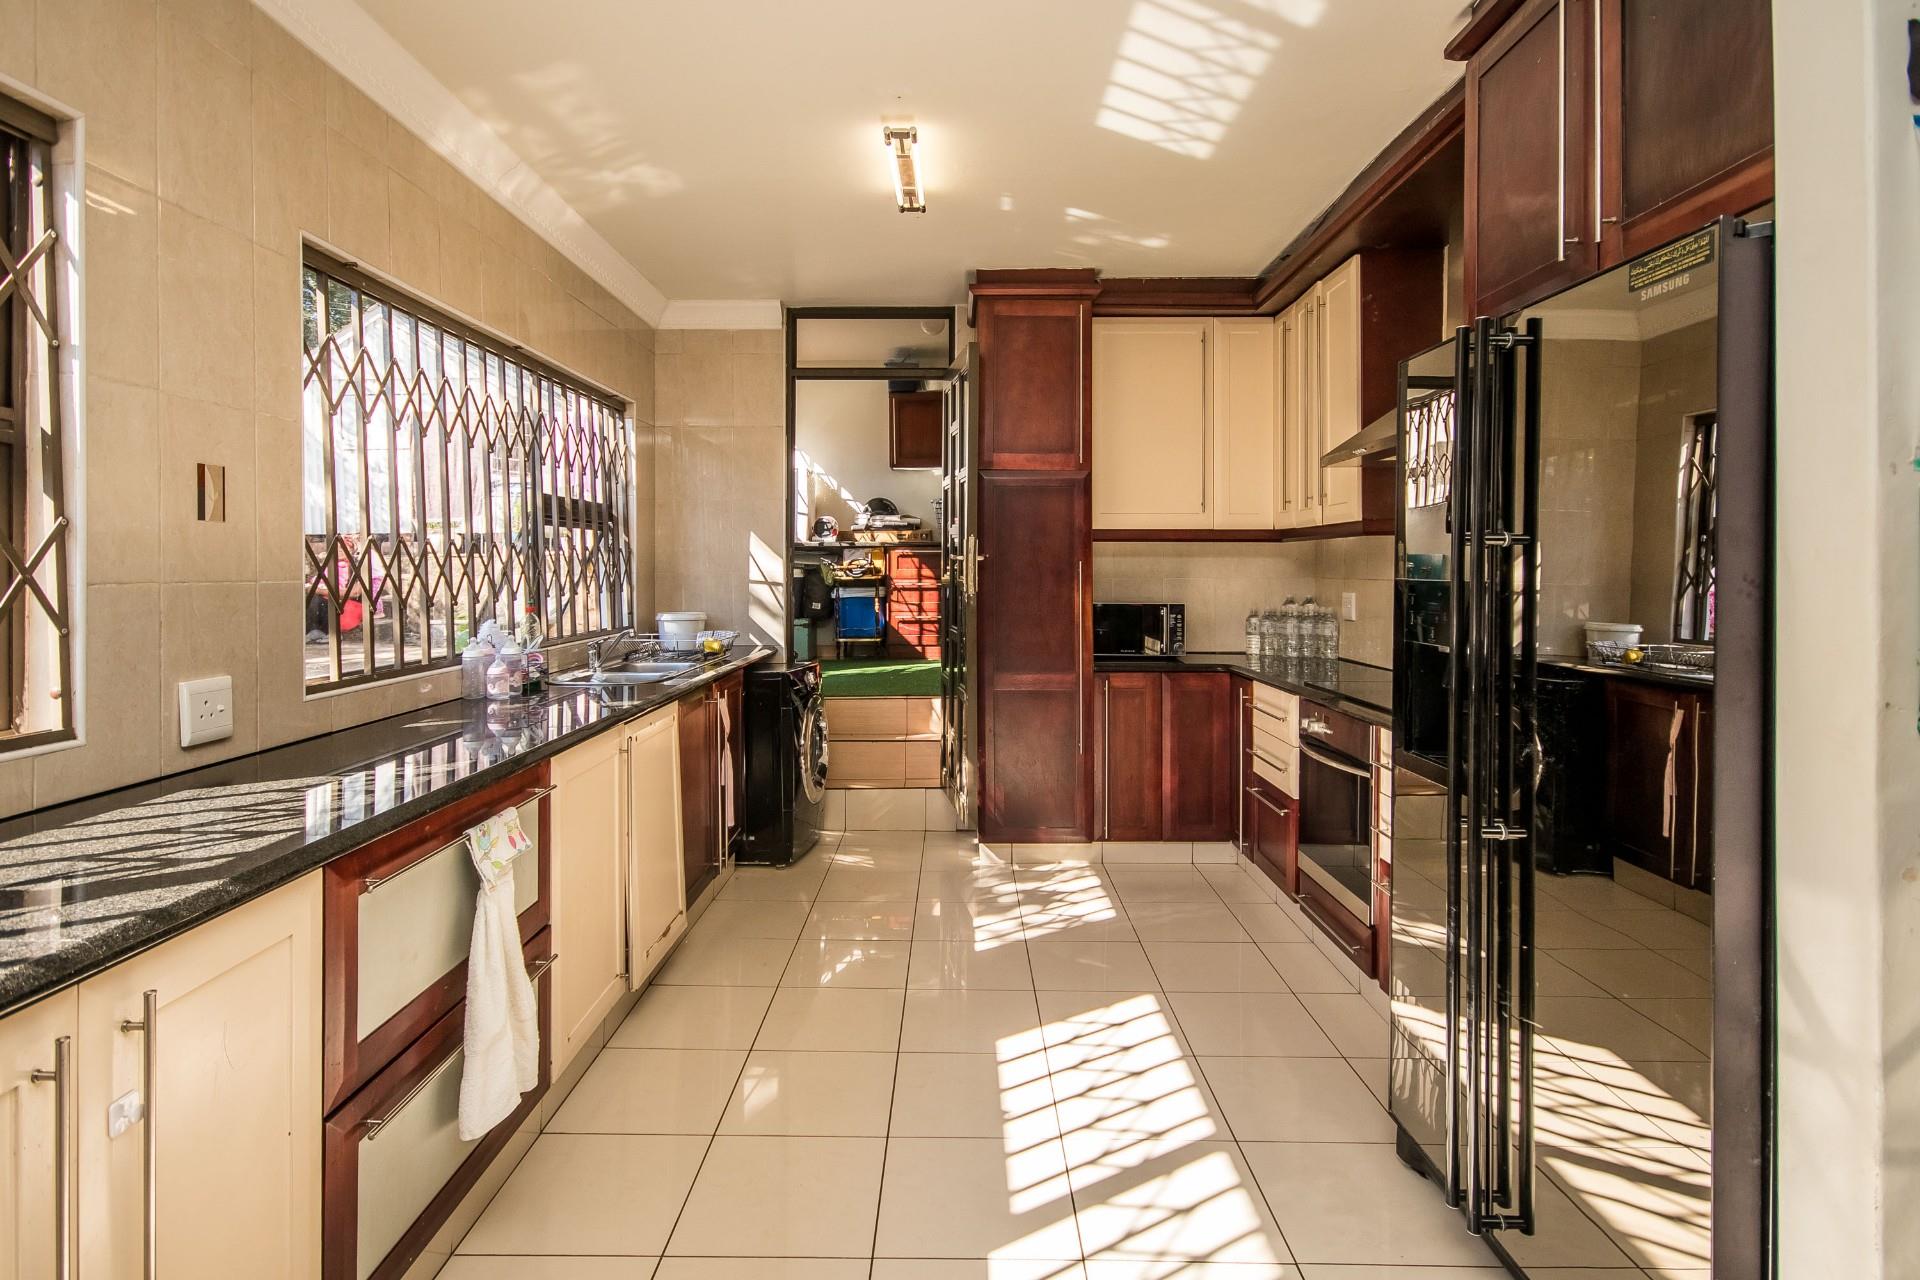 3 Bedroom House For Sale in Kloof | RE/MAX™ of Southern Africa